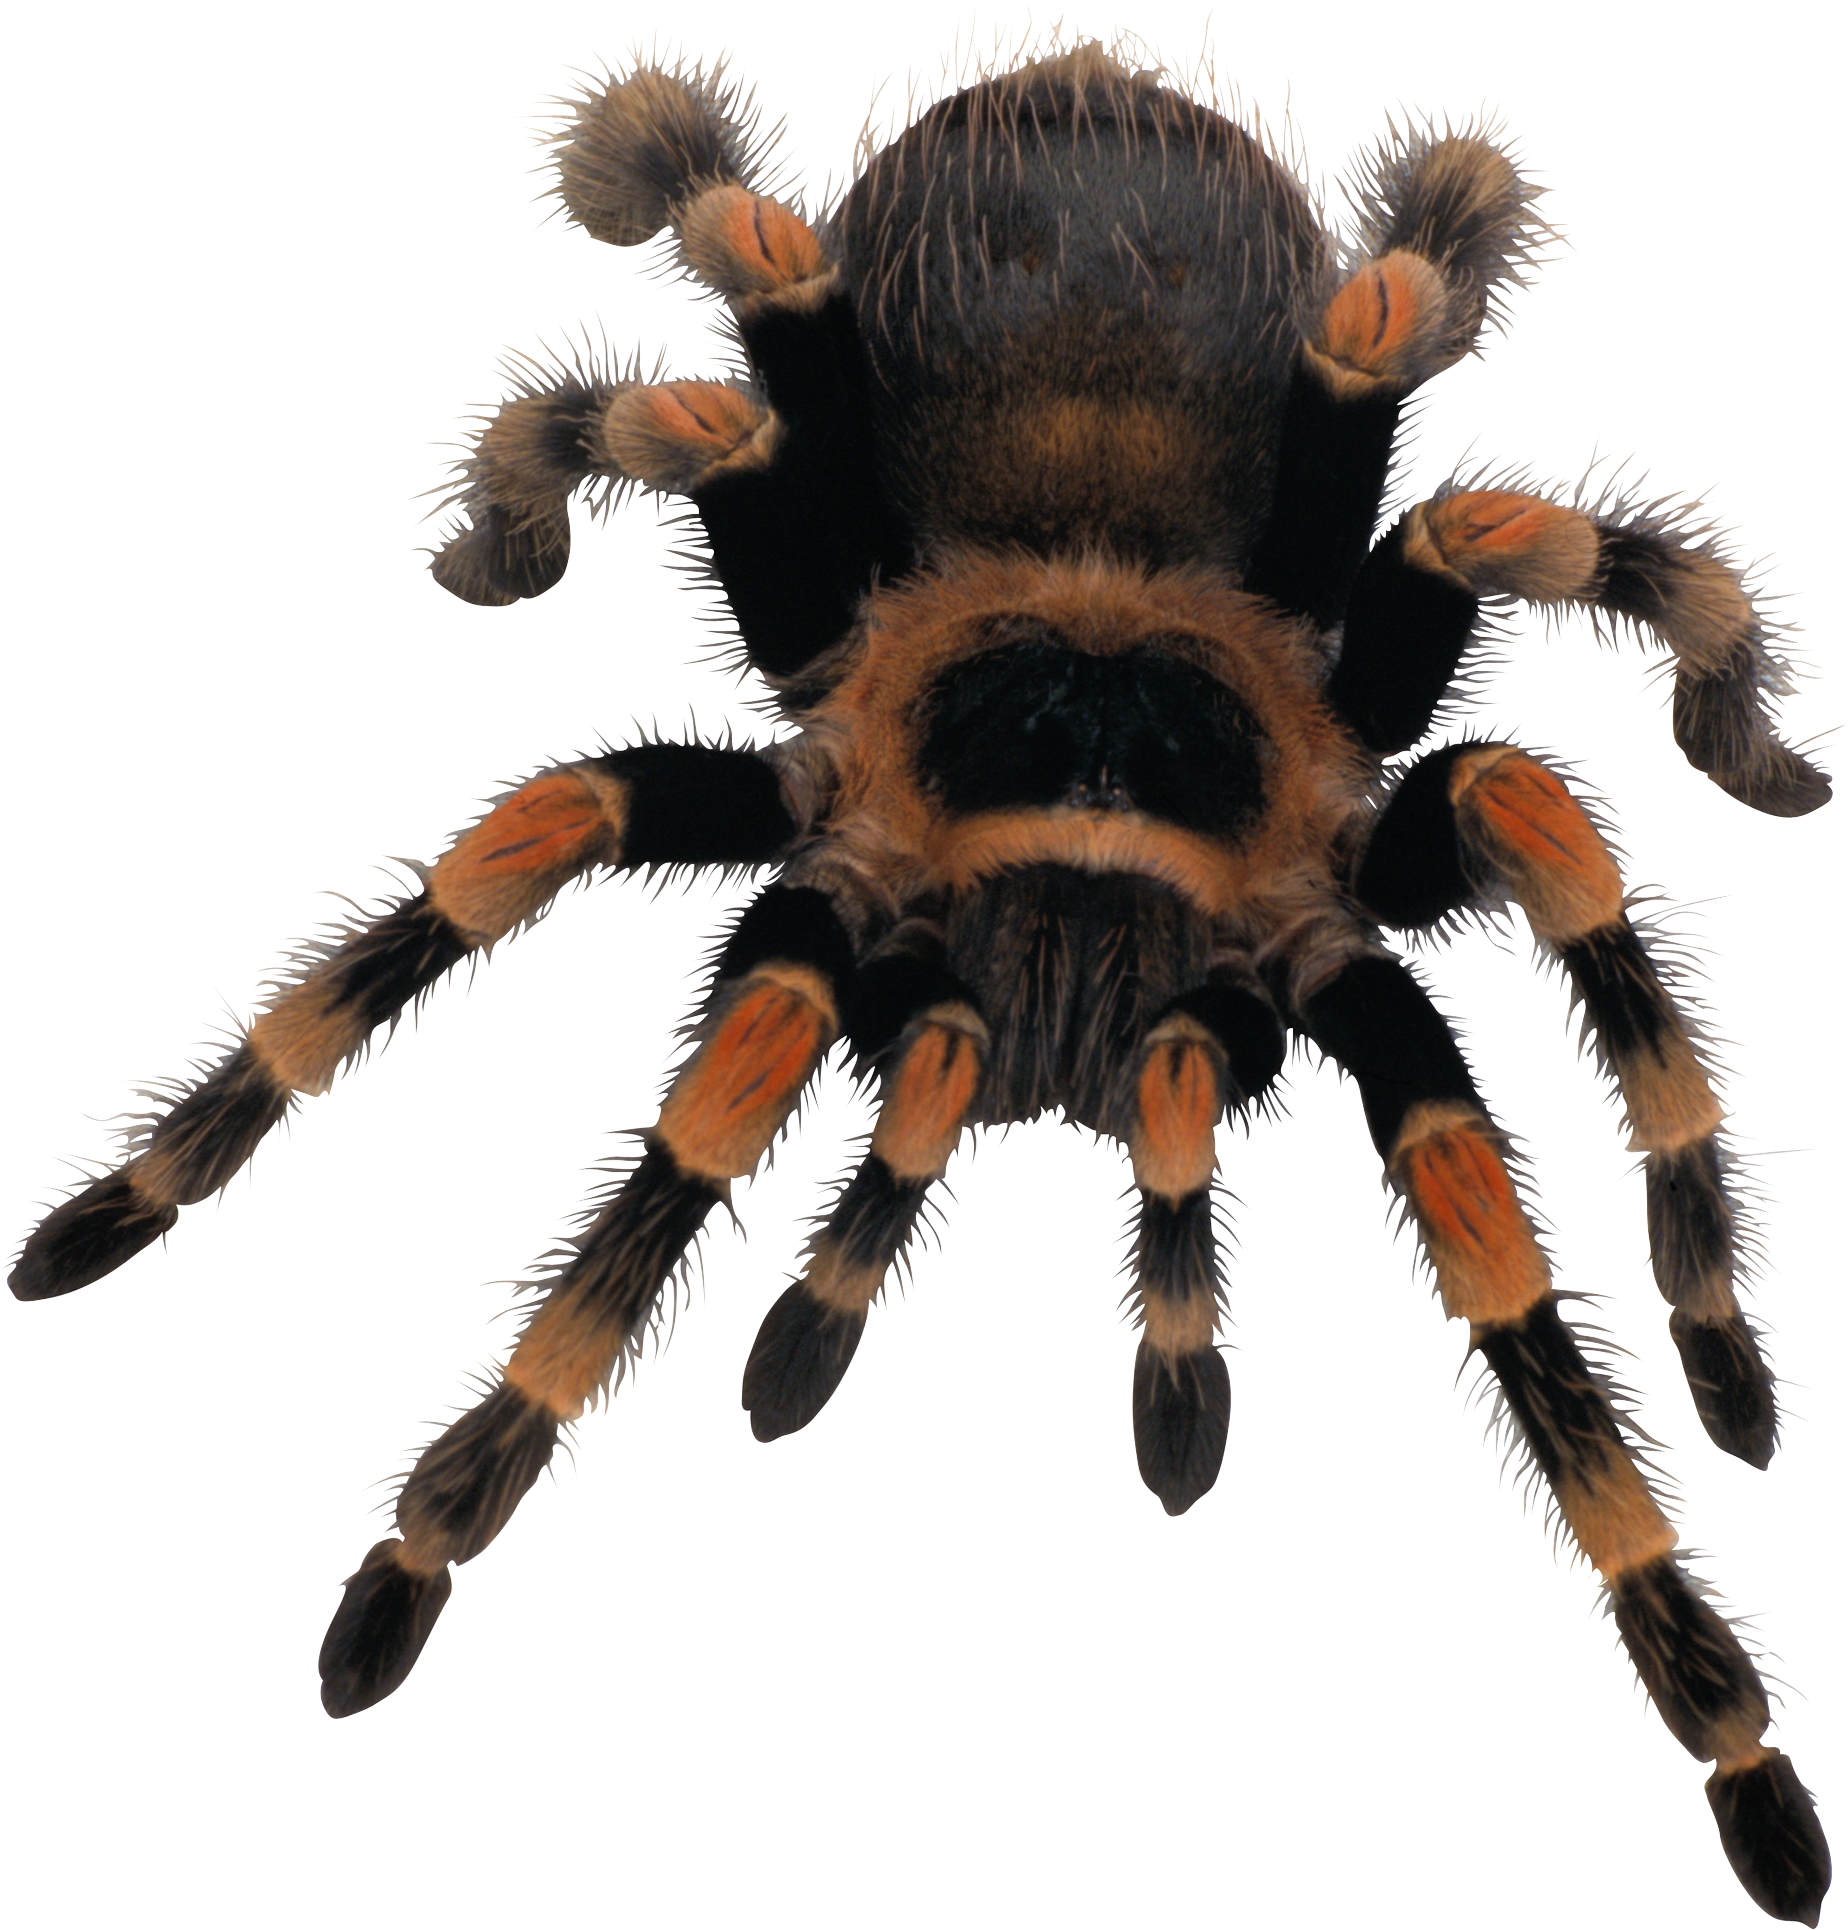 Spider - Spider, Transparent background PNG HD thumbnail